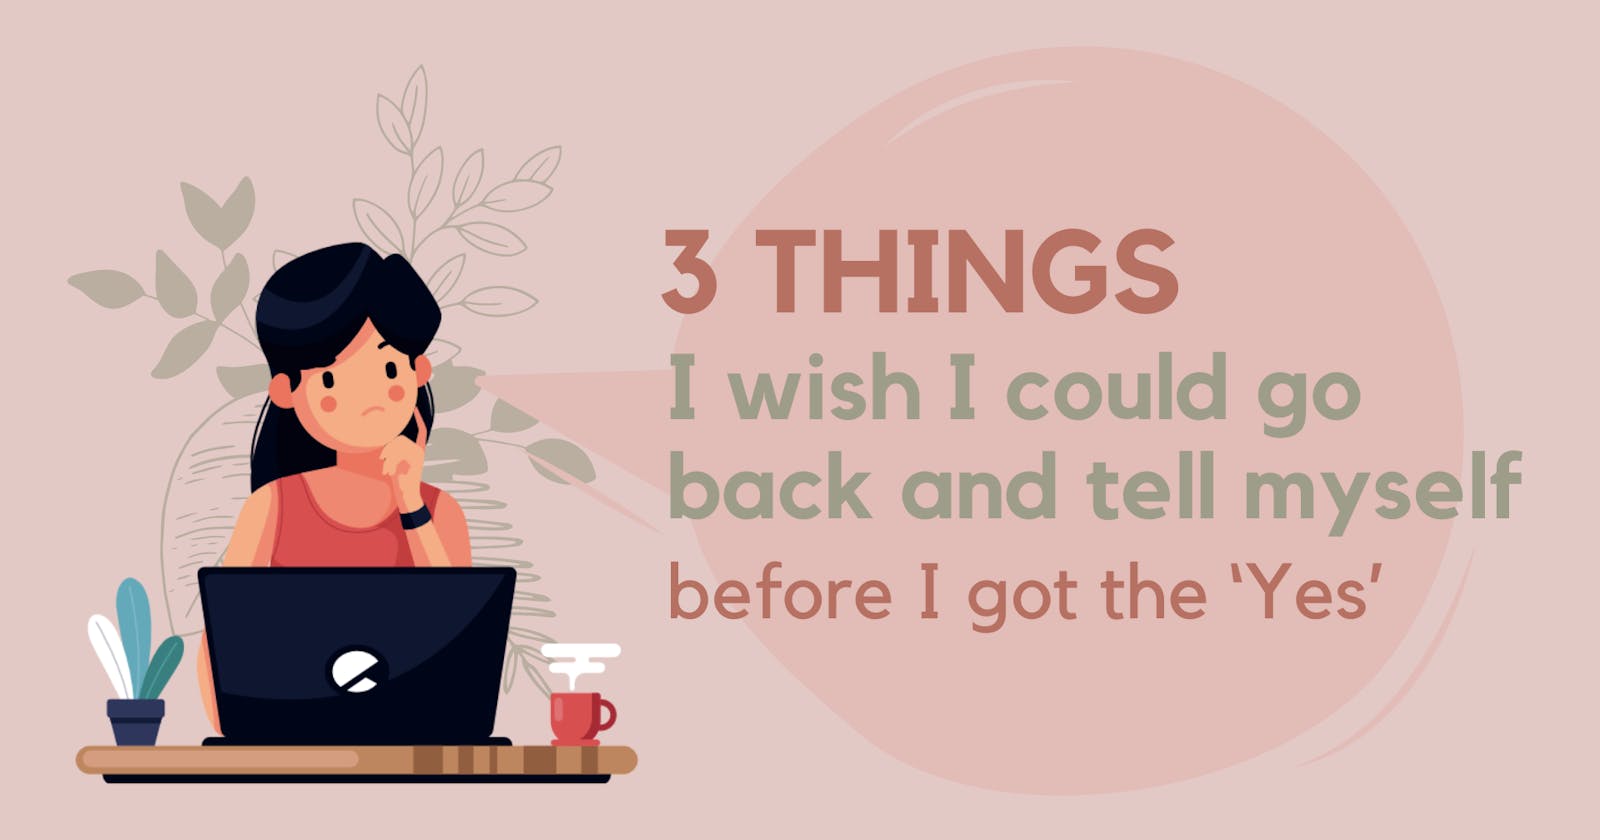 3 Things I wish I could go back and tell myself before I landed the first ‘Yes’